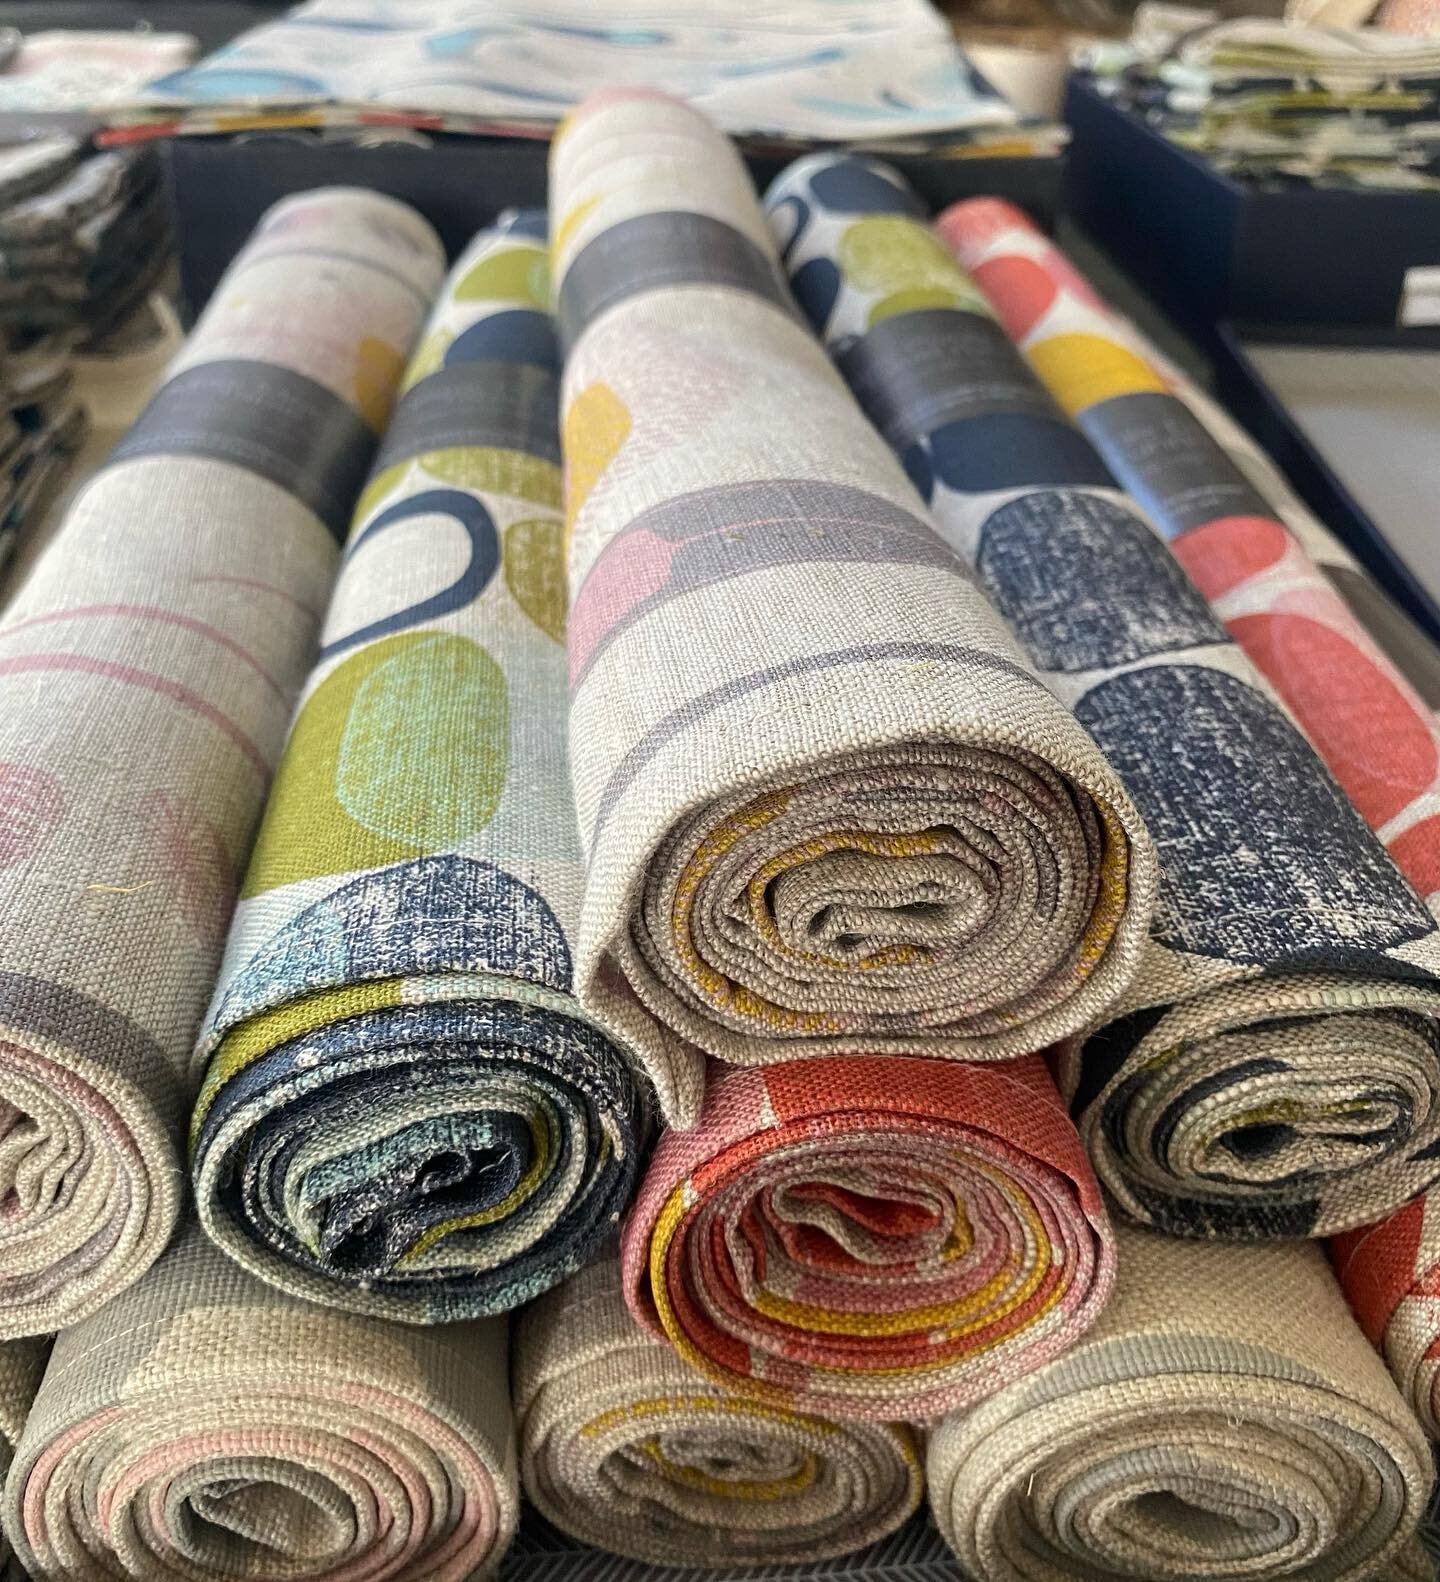 Fresh linen all stitch pressed and rolled into table runners, ready for the @designedmadetas Makers Market along with lots of other goodies. Looking forward to a great weekend, and hope to see lots of Tassie peeps. 
#makers #market #tasmanian #design